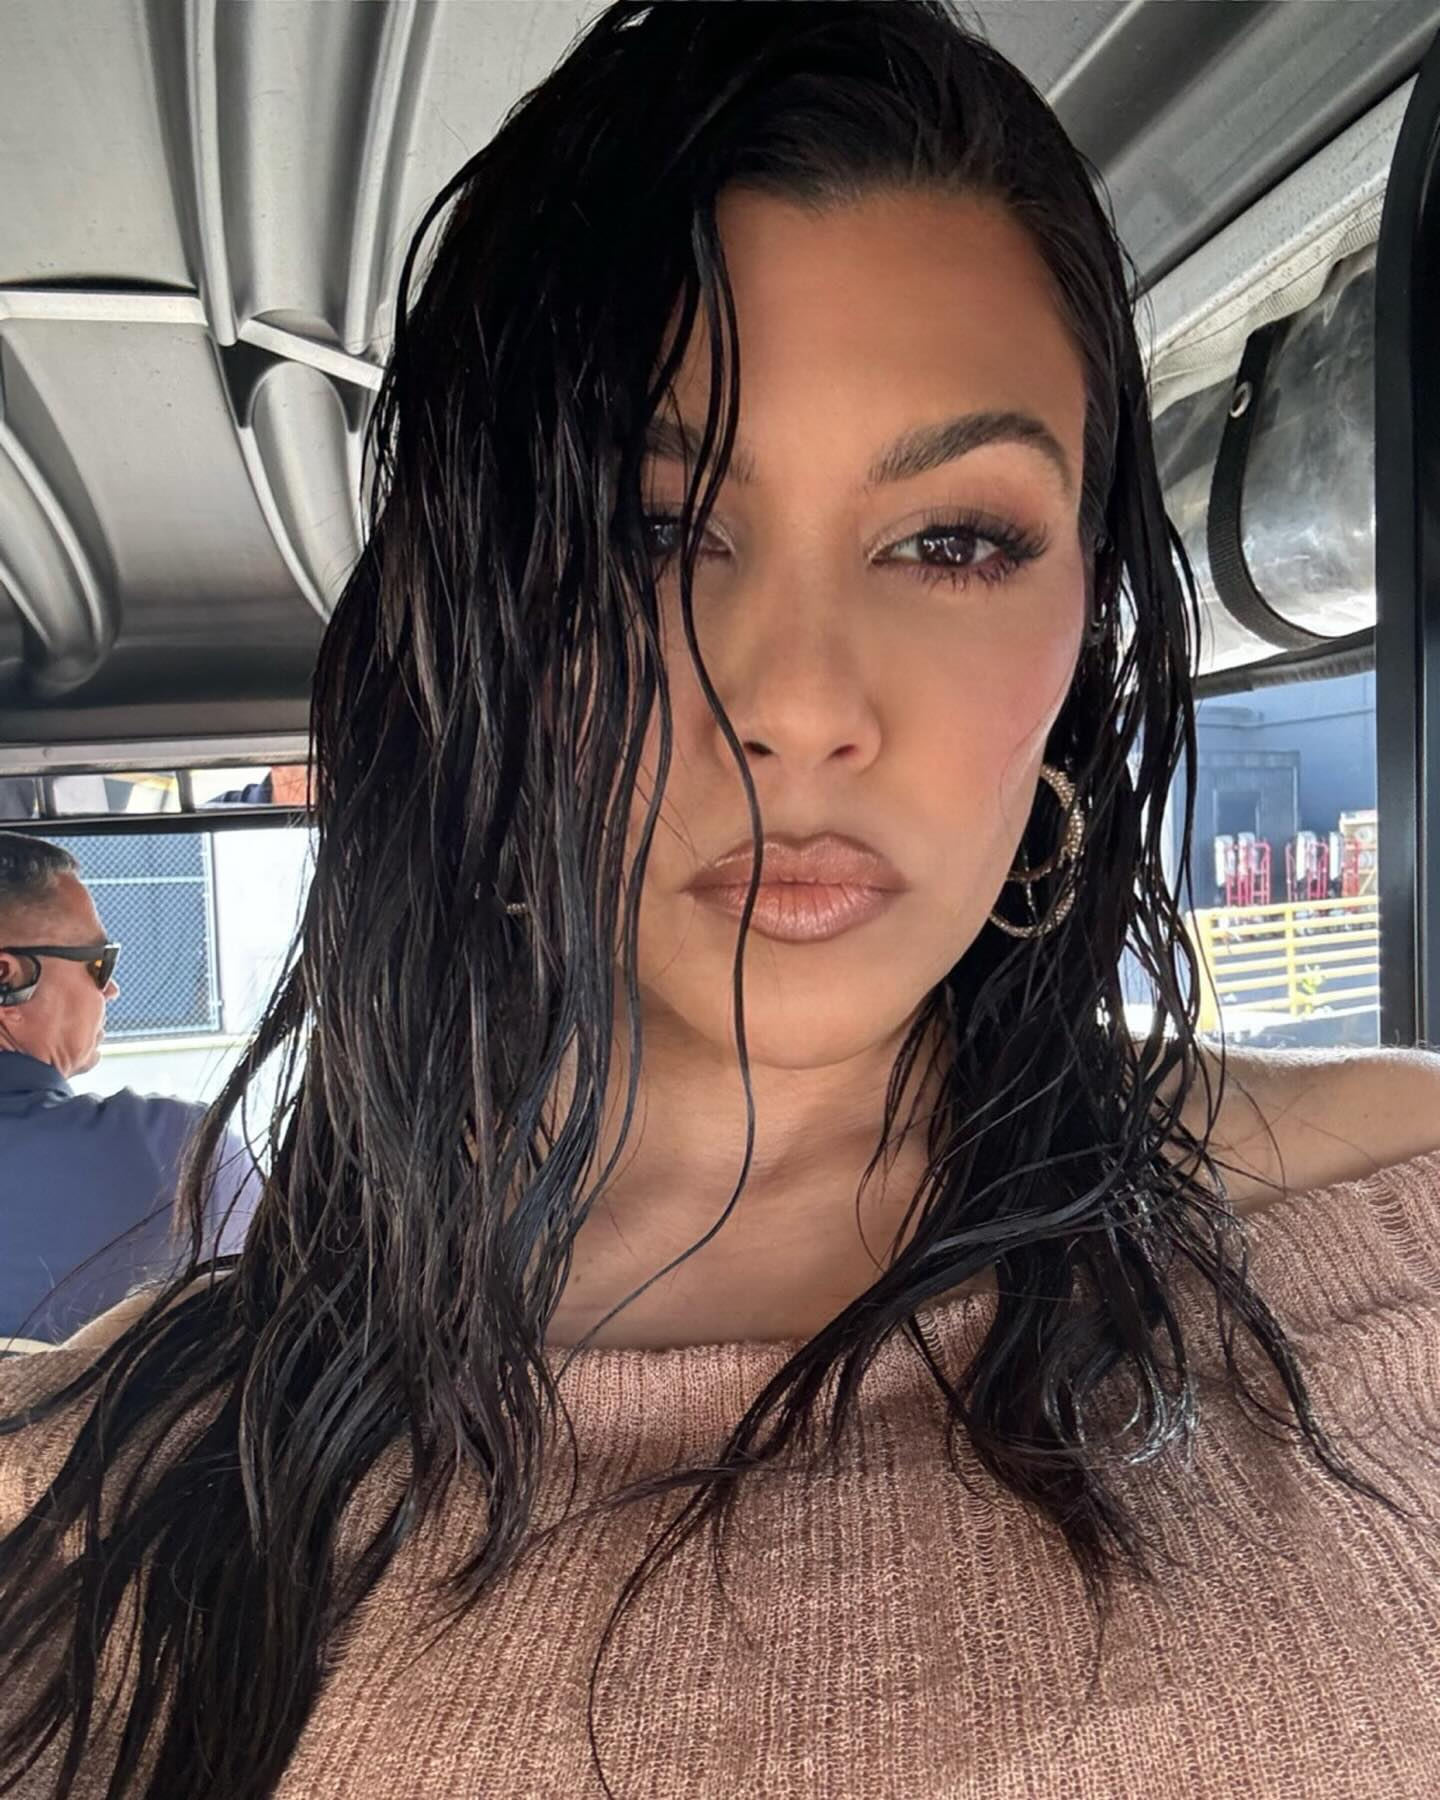 On Thursday, Kourtney shared photos and videos of the inner goings of the Camp Poosh retreat on the Poosh Instagram account